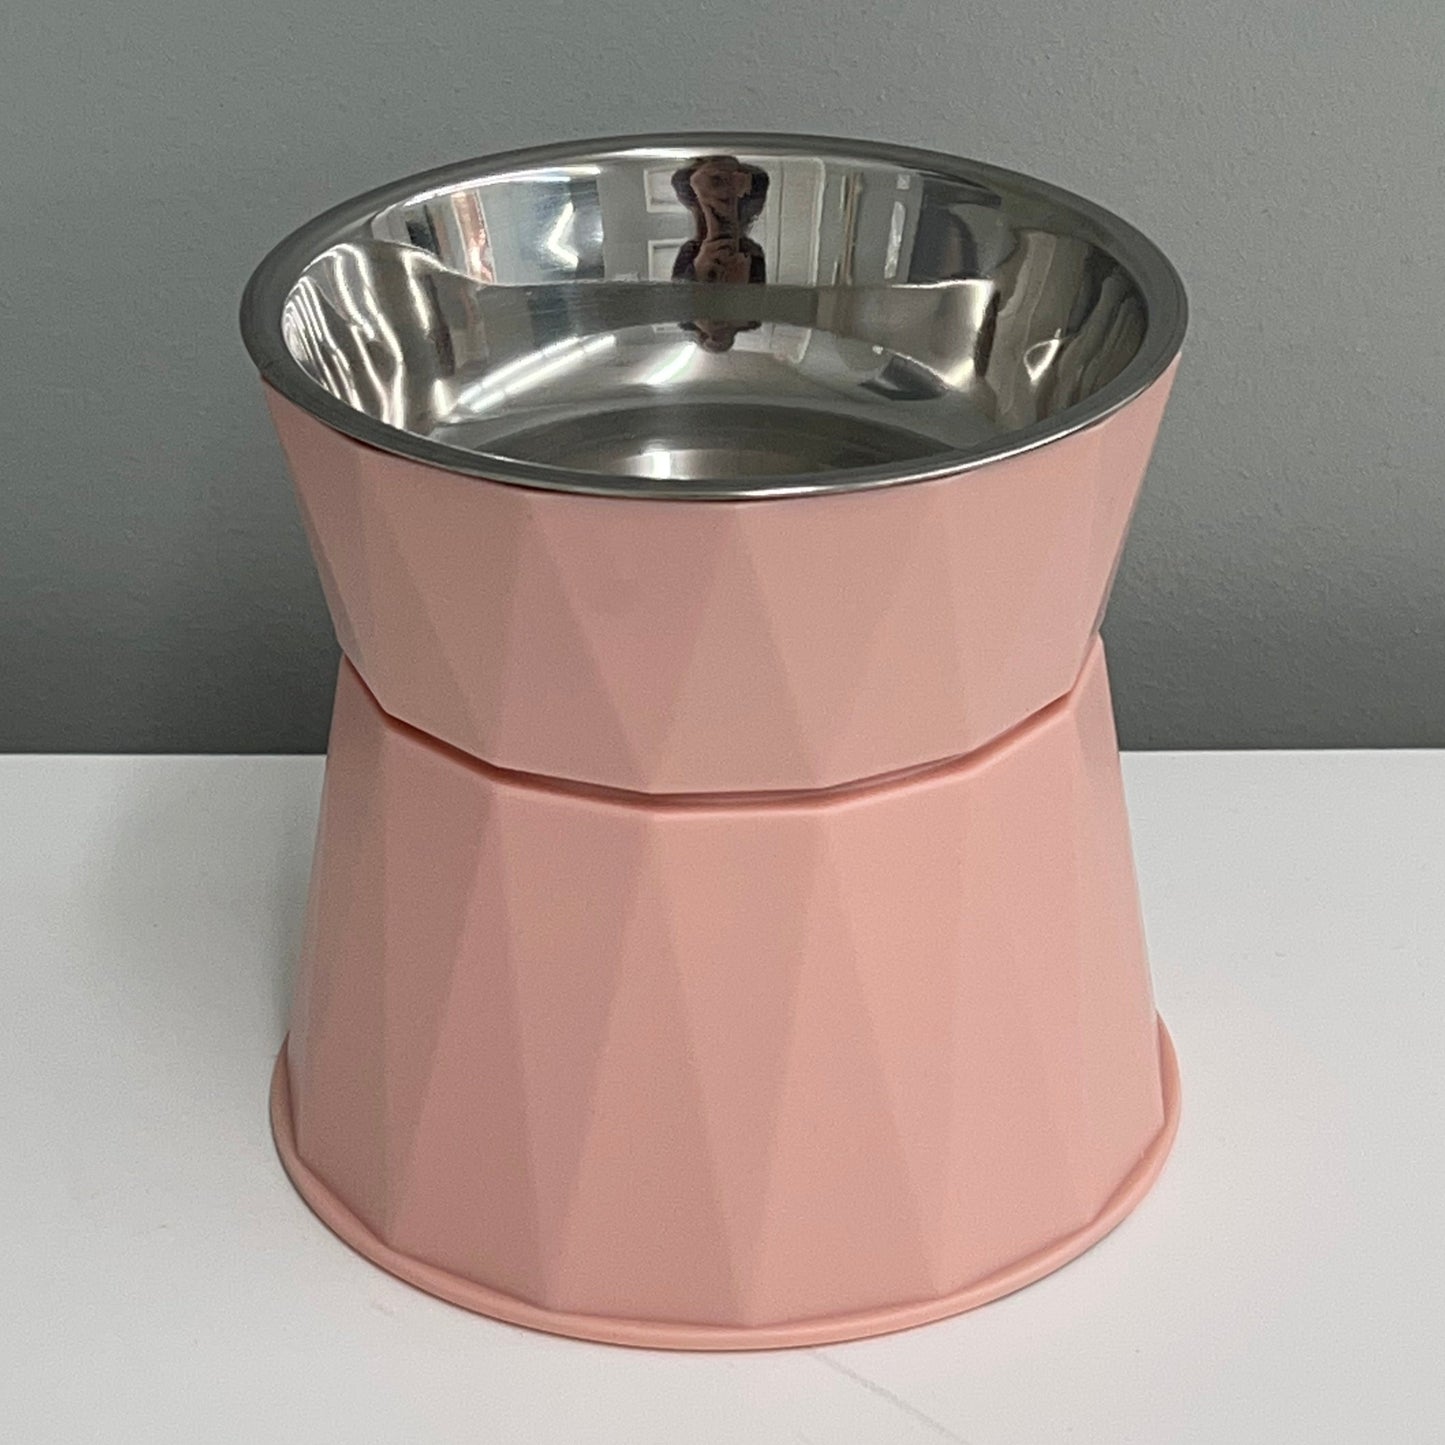 Removeable Decorative Pet Bowl w/ Stand